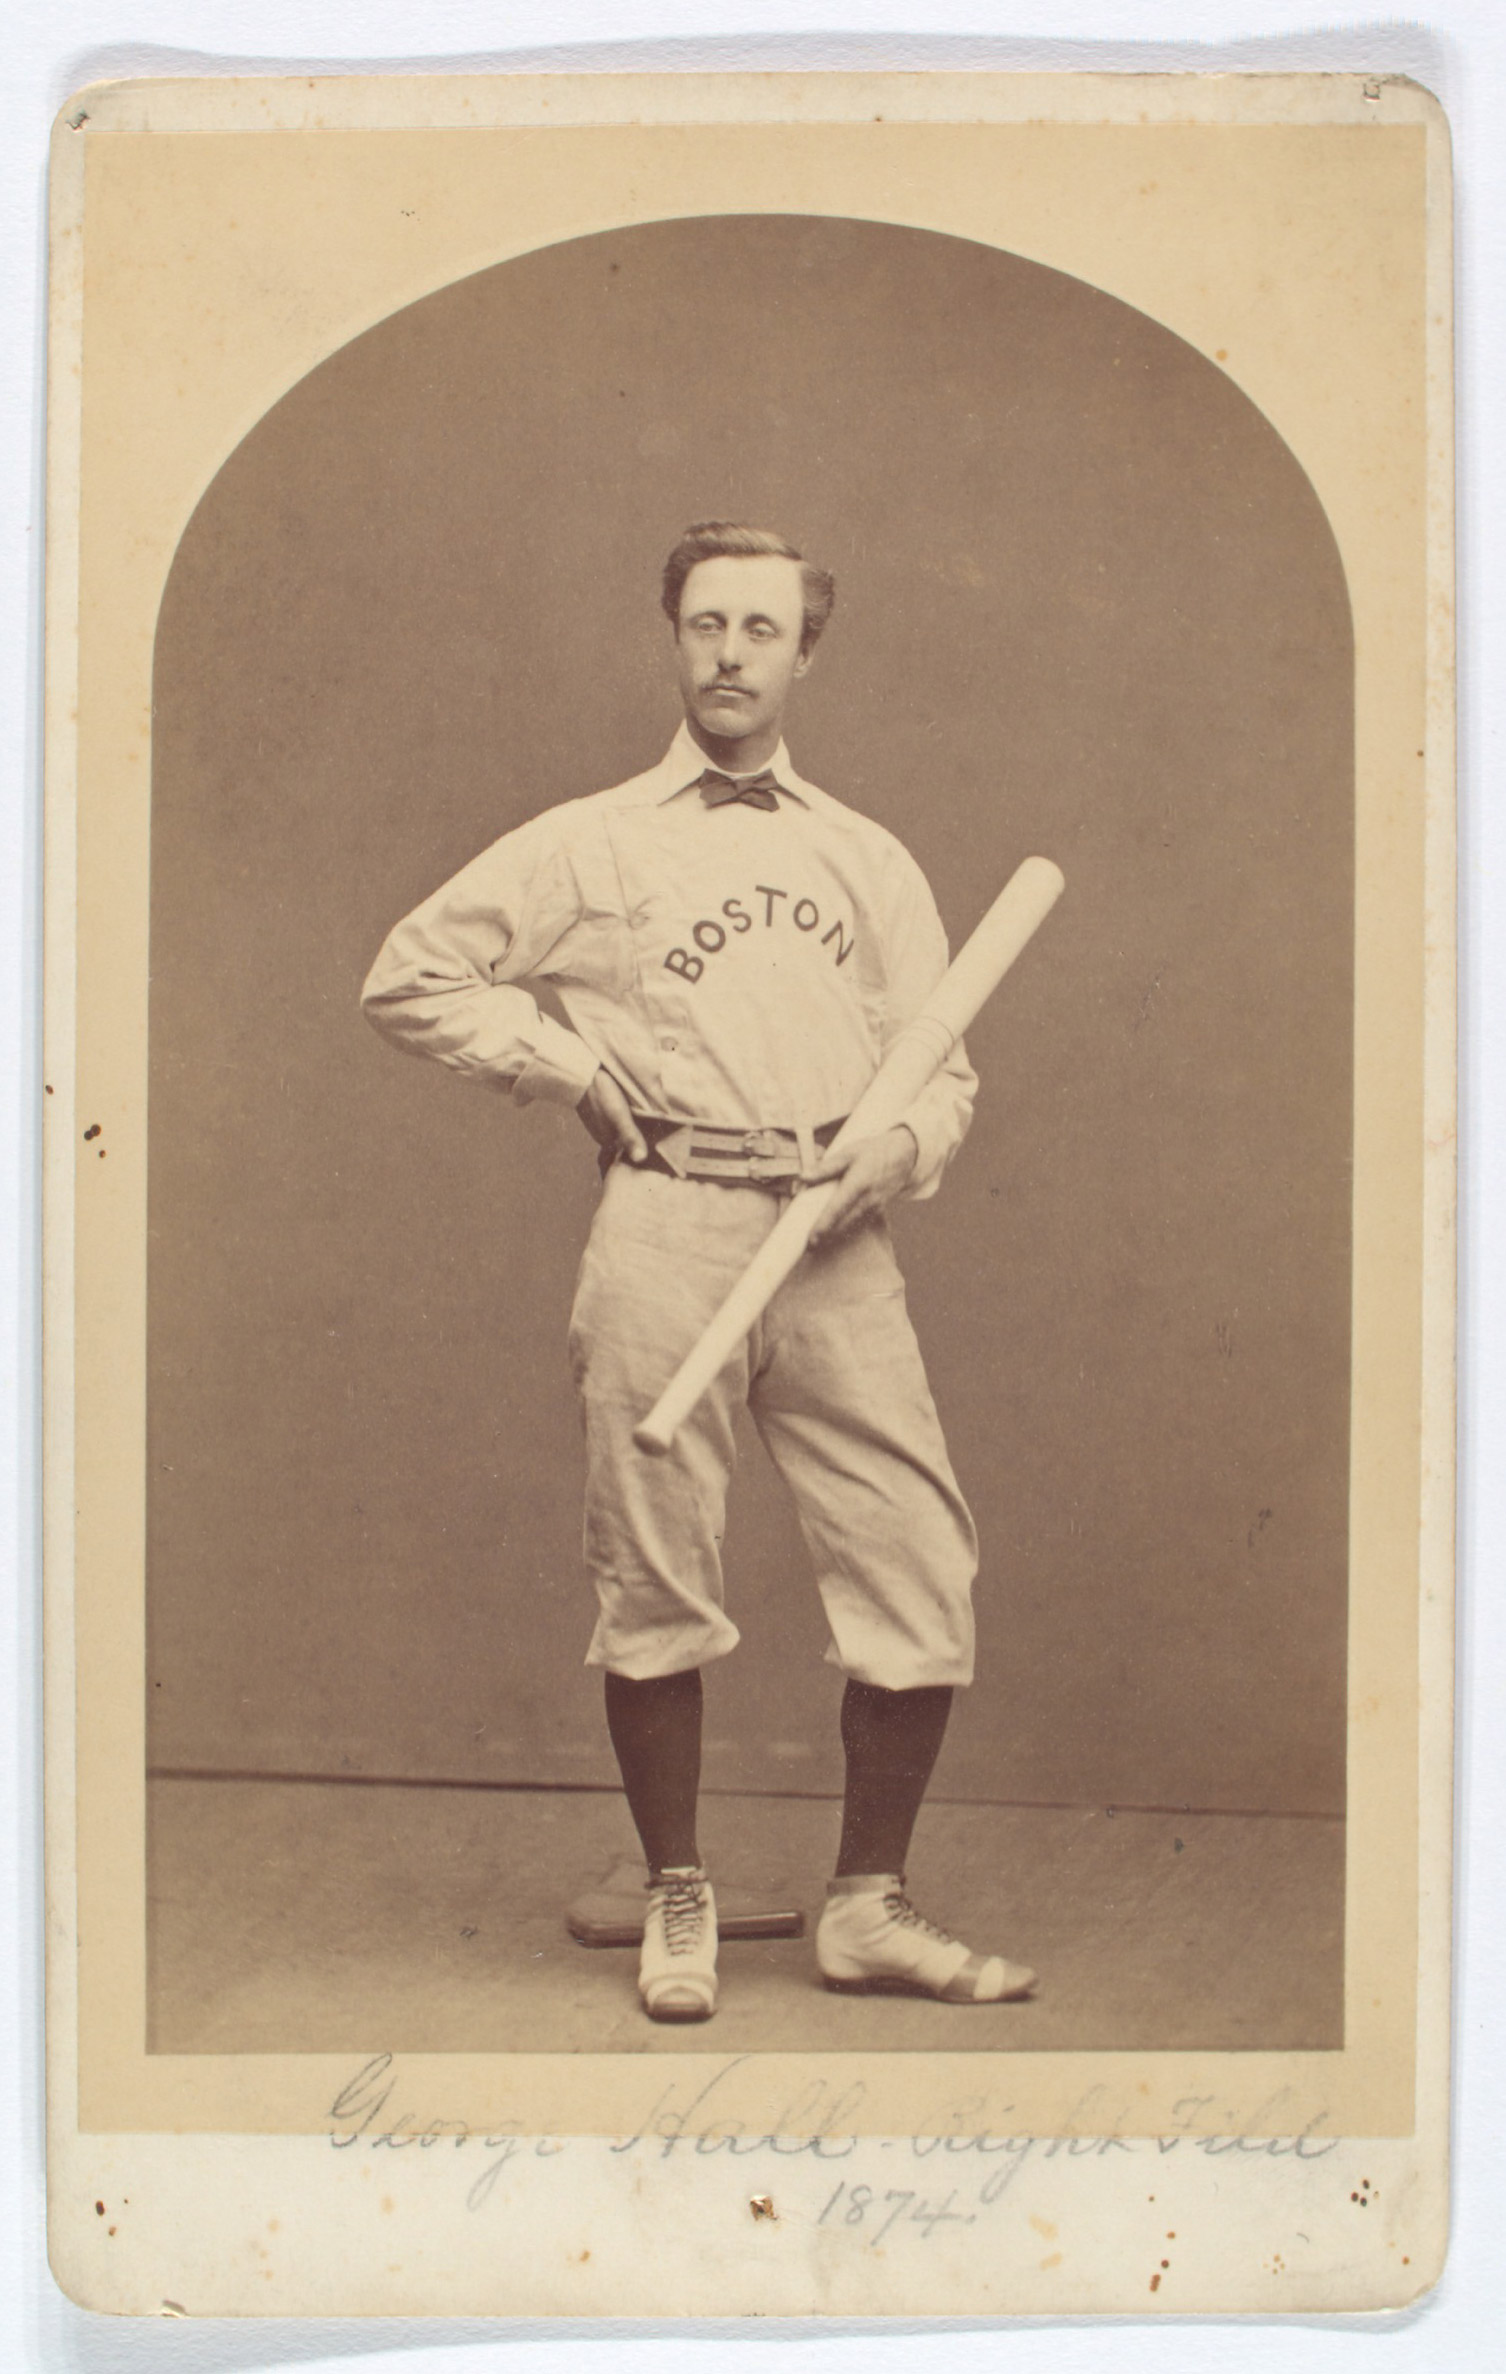 George Hall, Boston Red Stockings, 1874, right field, A.G. Spaulding Baseball Collection.